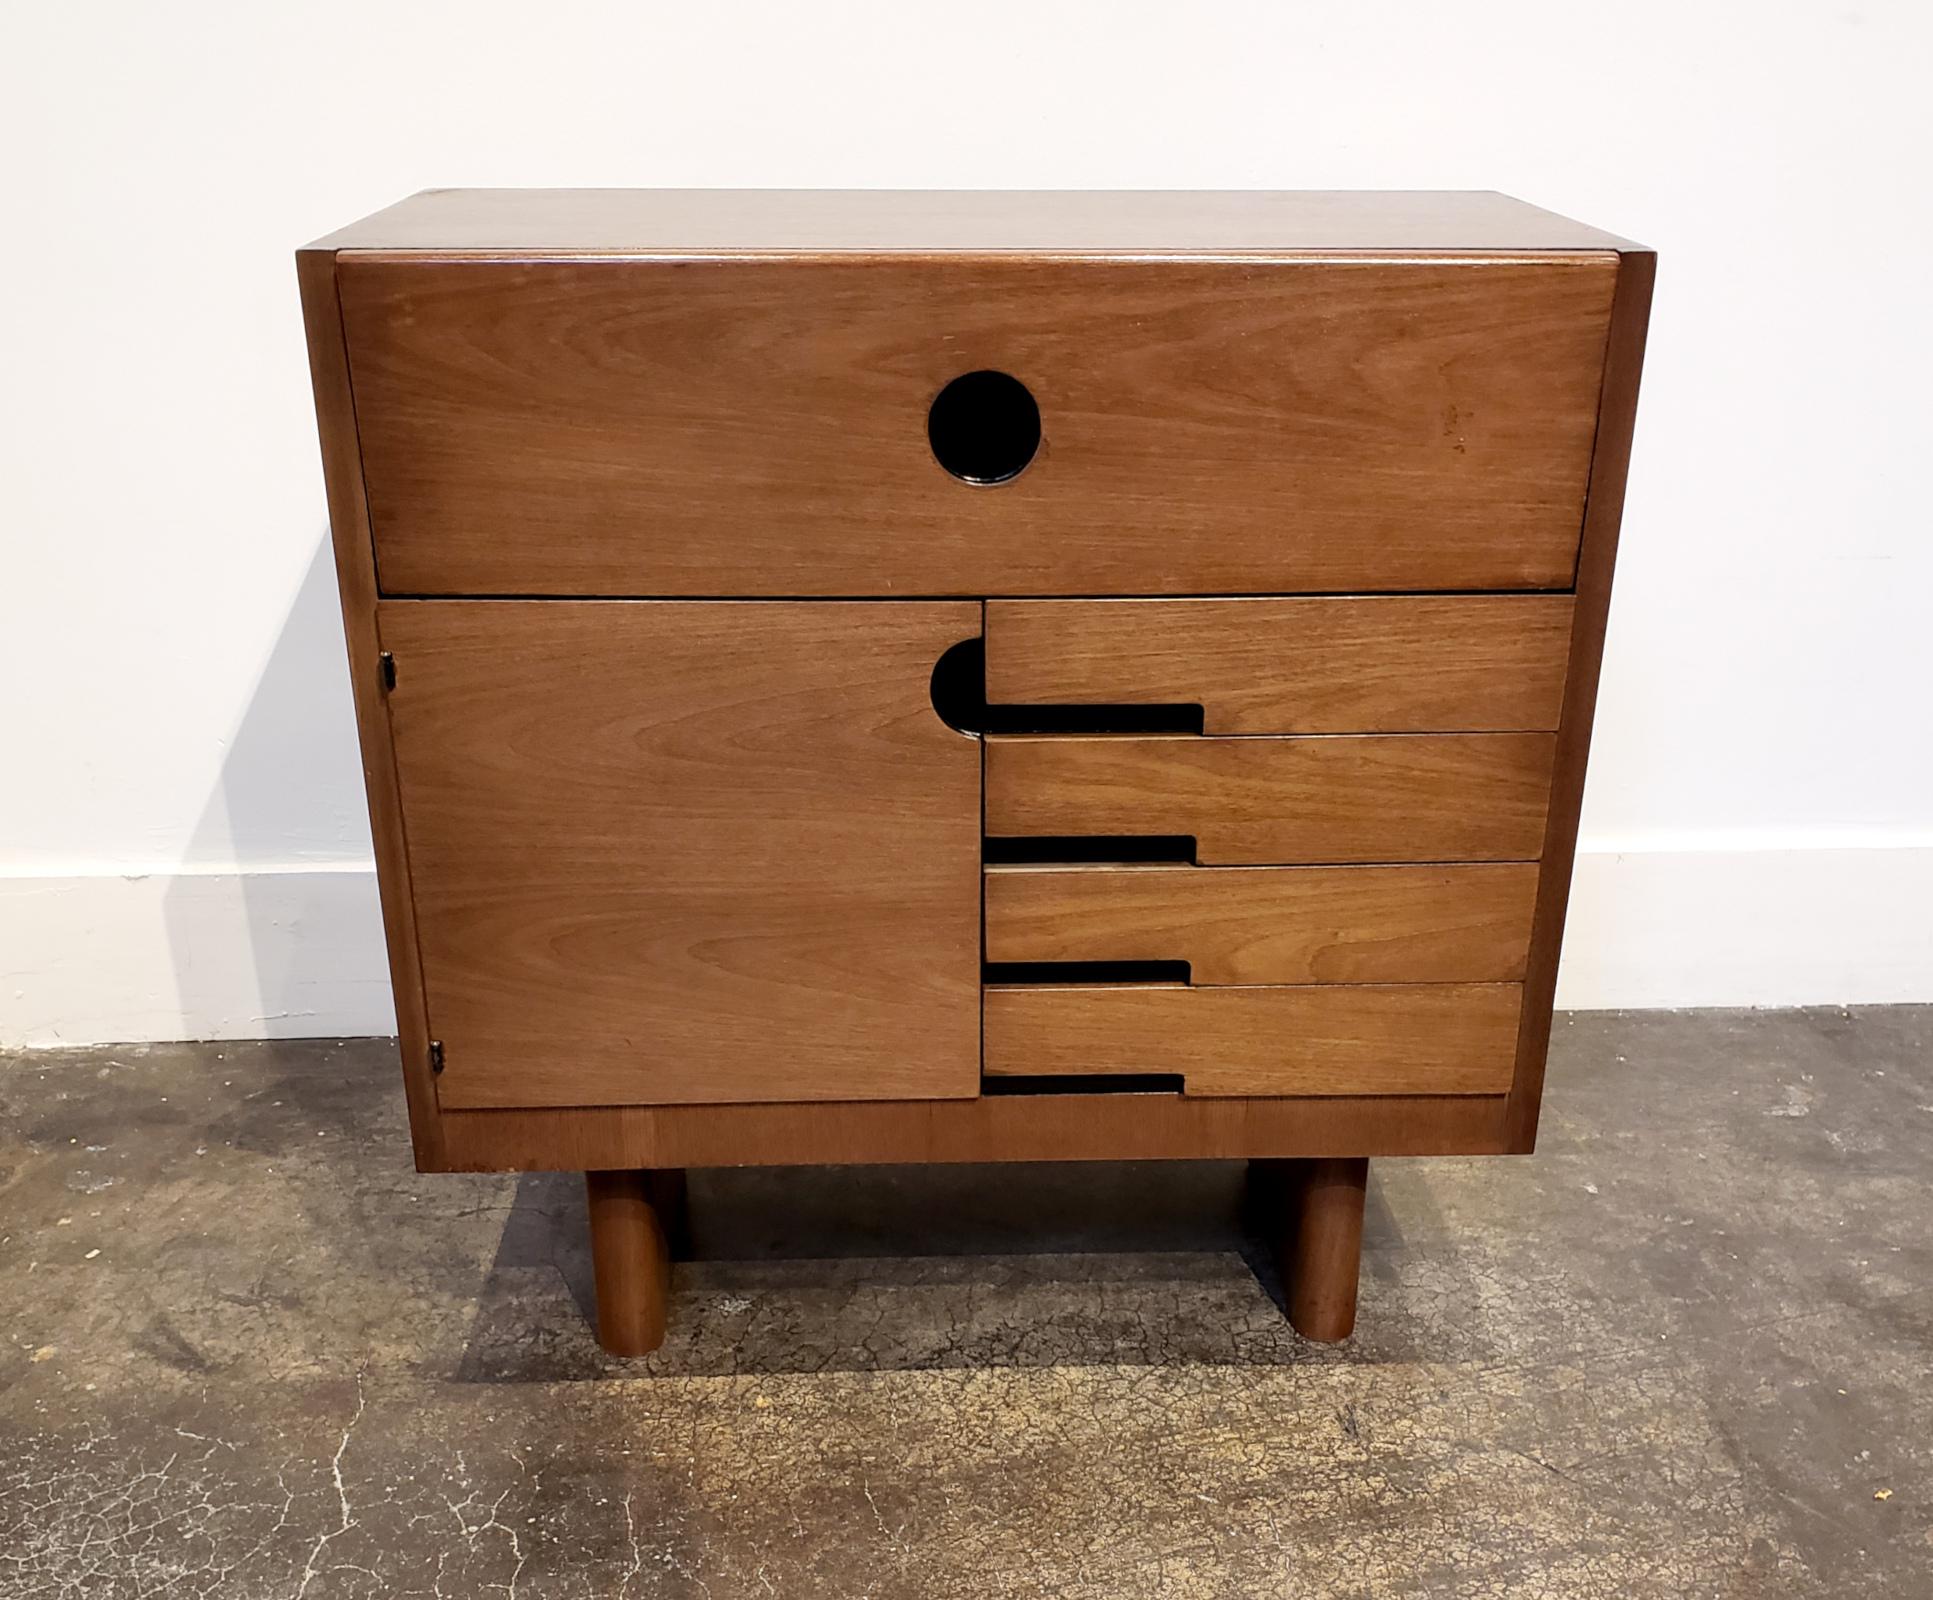 Modernist Art Deco era cabinet designed by Gilbert Rohde for Herman Miller circa 1930's-1940's. Sleek minimalist design in Mahogany wood with pulls accented in black. Top pulls down to reveal several small hutches and trays for papers/letters, etc.